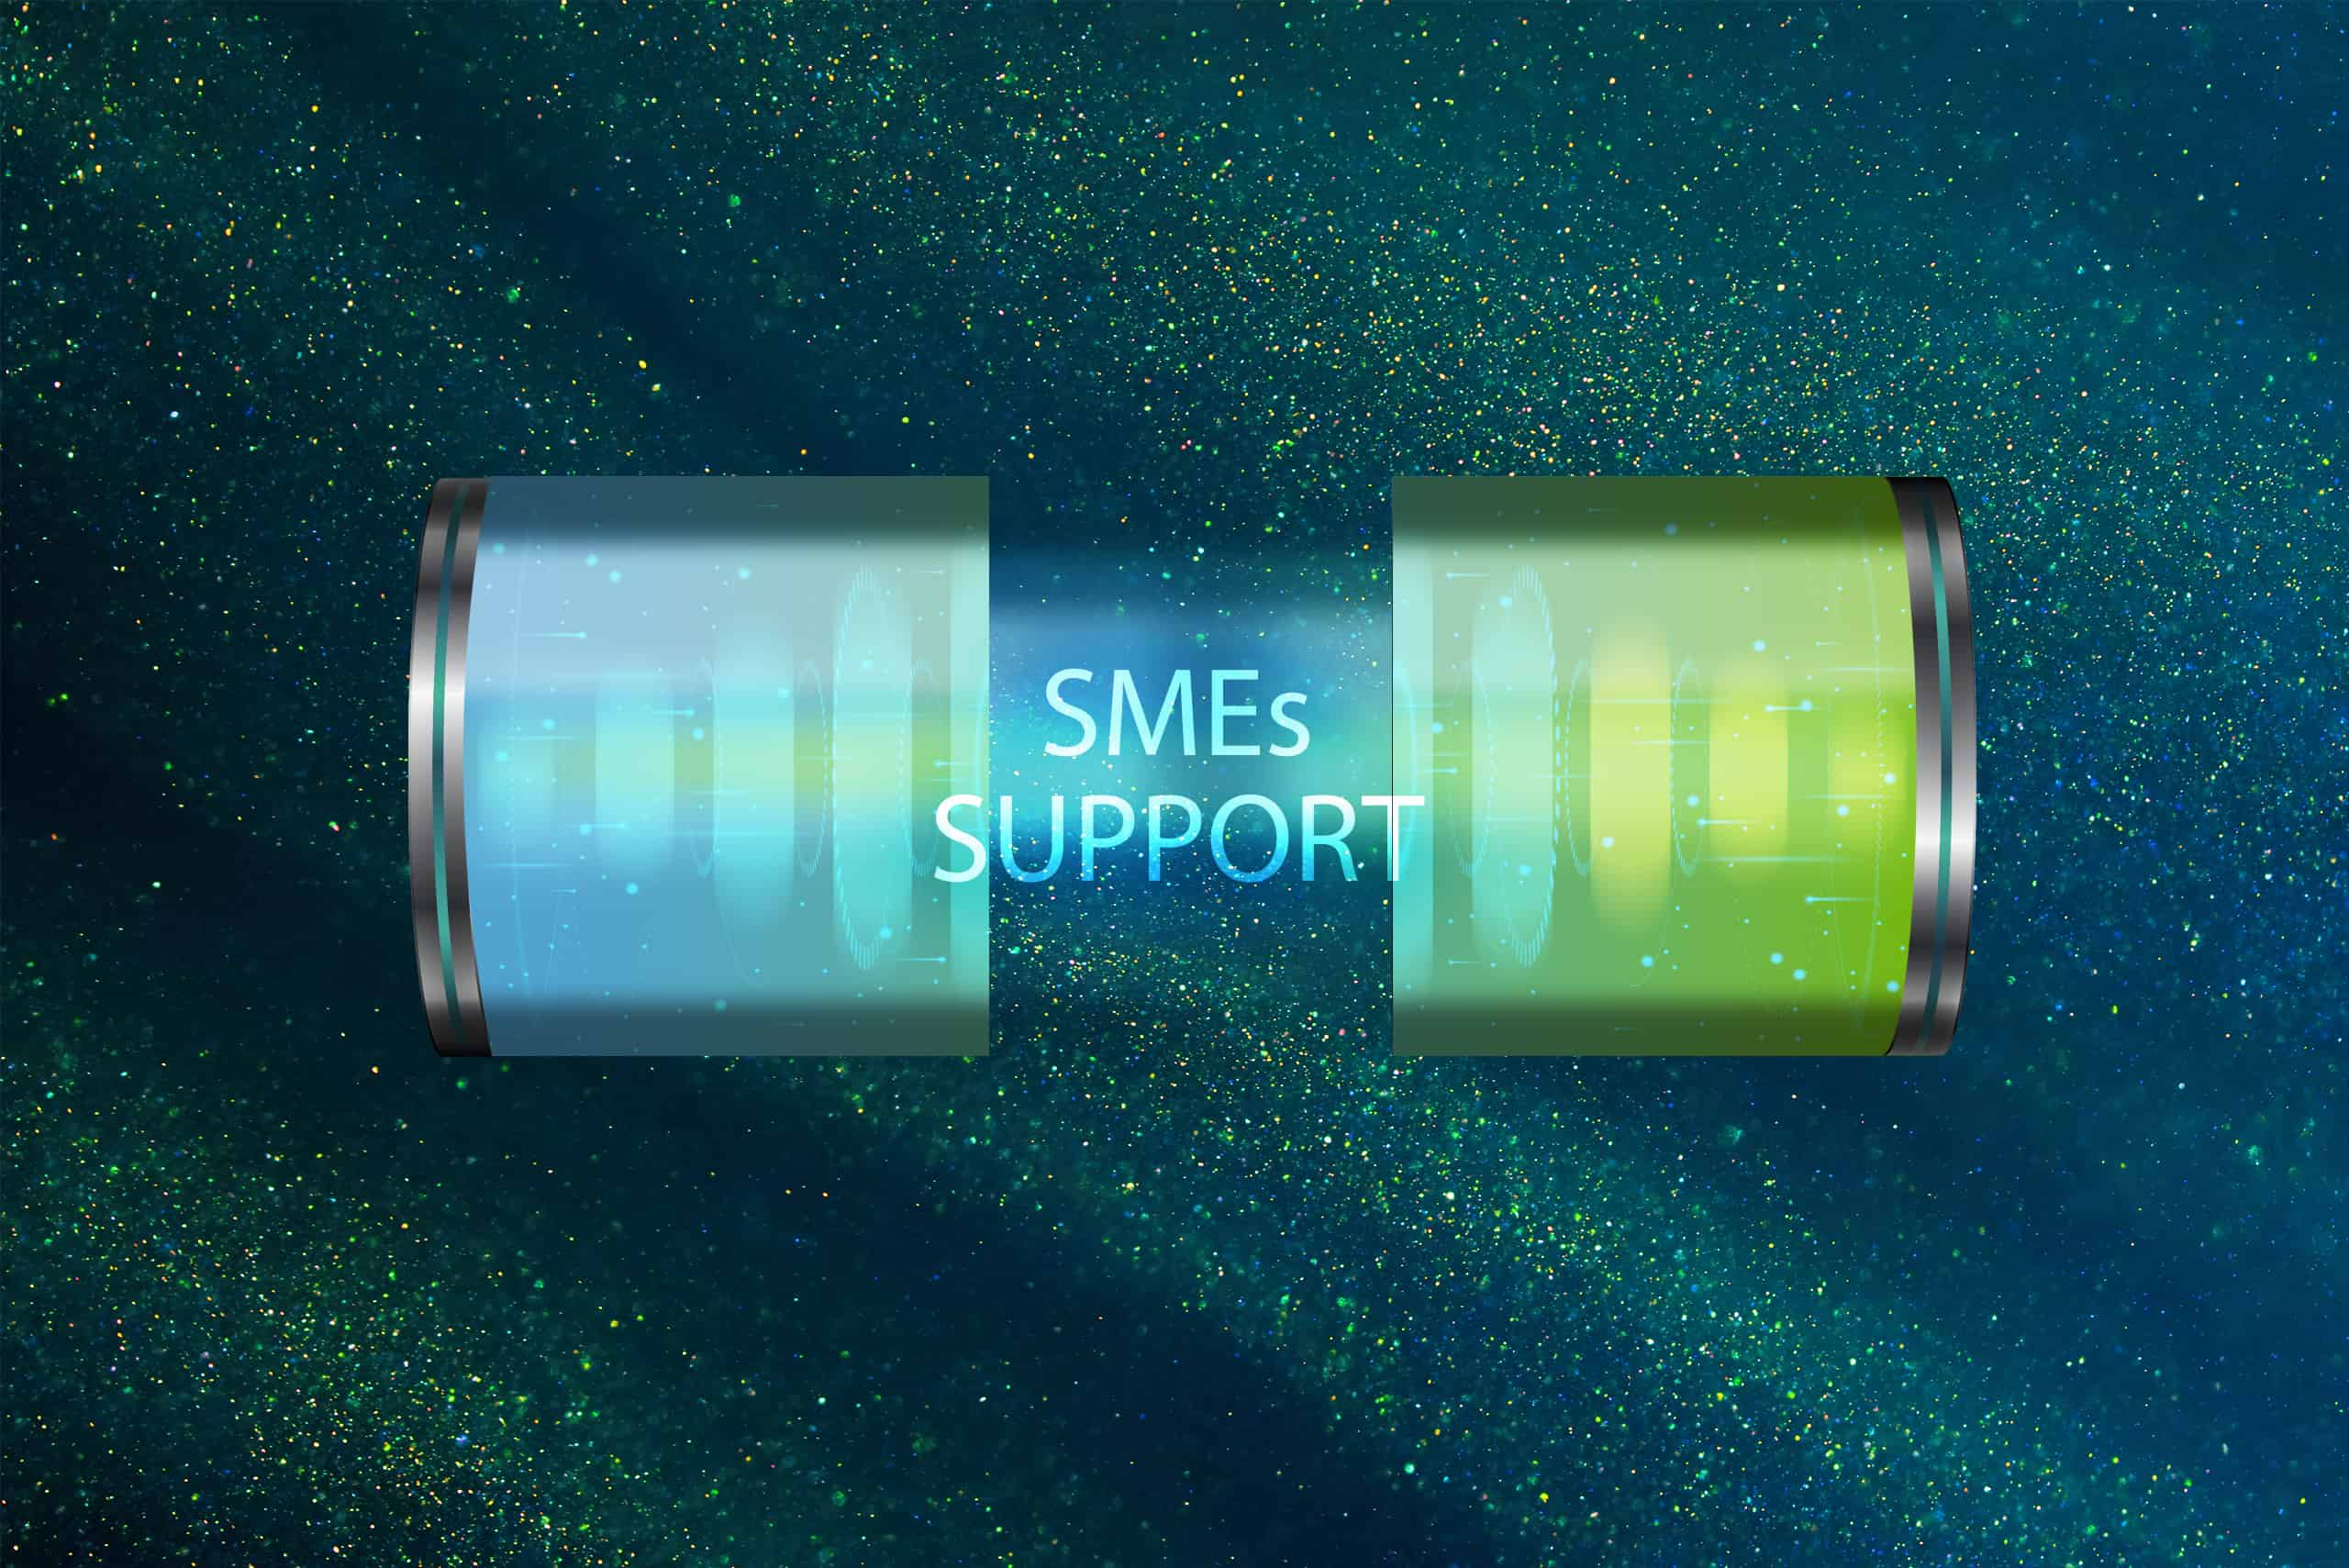 smes support project capsule image